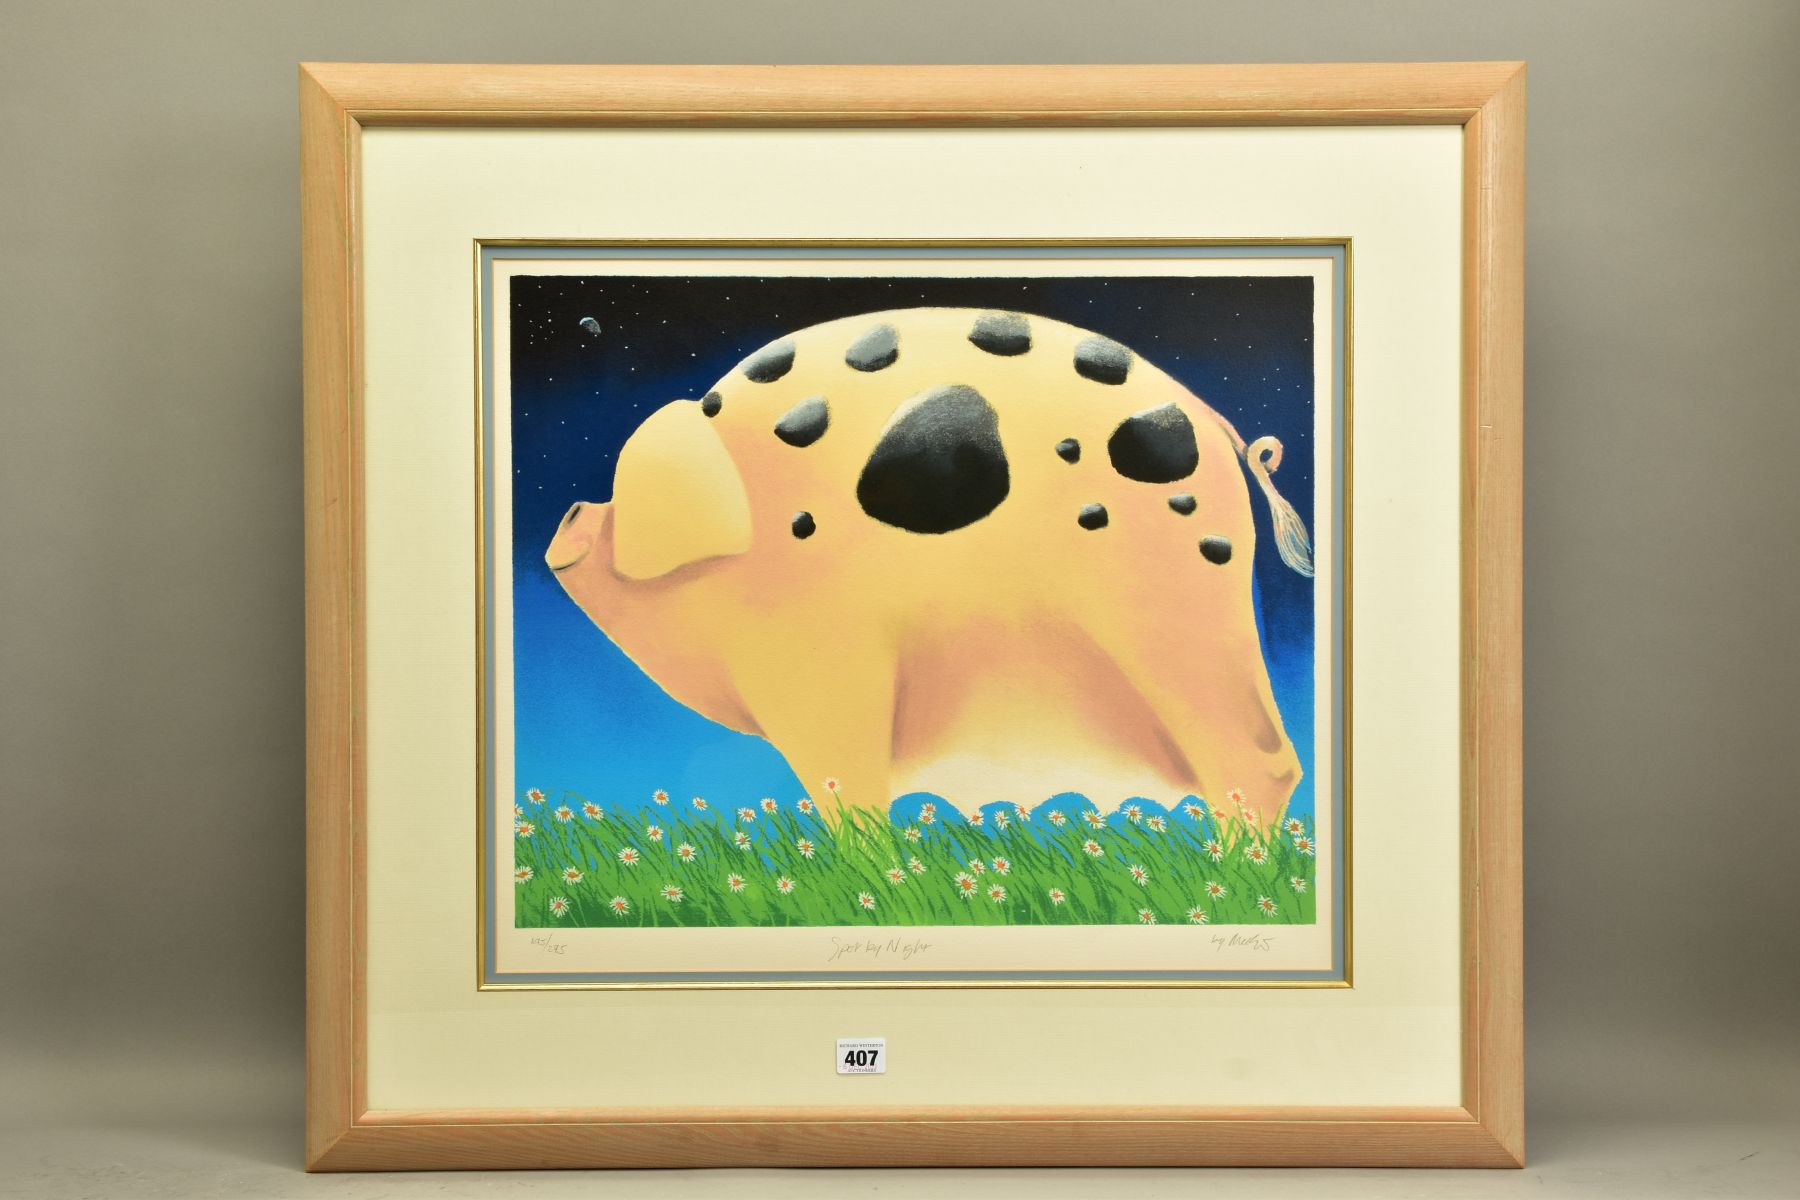 MACKENZIE THORPE (BRITISH 1956) 'SPOT BY NIGHT' A SIGNED LIMITED EDITON PRINT OF A PIG, 145/275 no